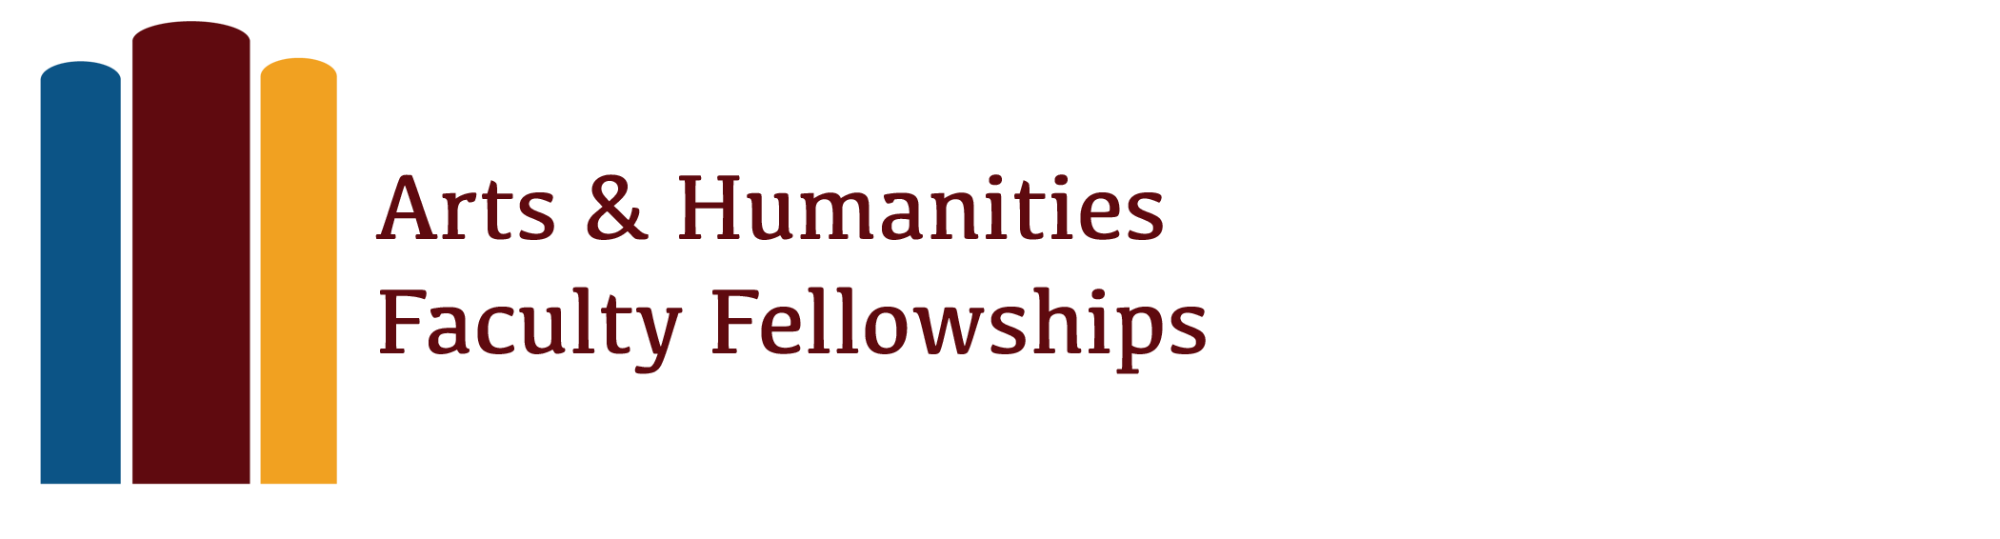 Abstract emblem of three books one dark blue, one crimson, and one gold, with the text "Arts & Humanities Faculty Fellowships""